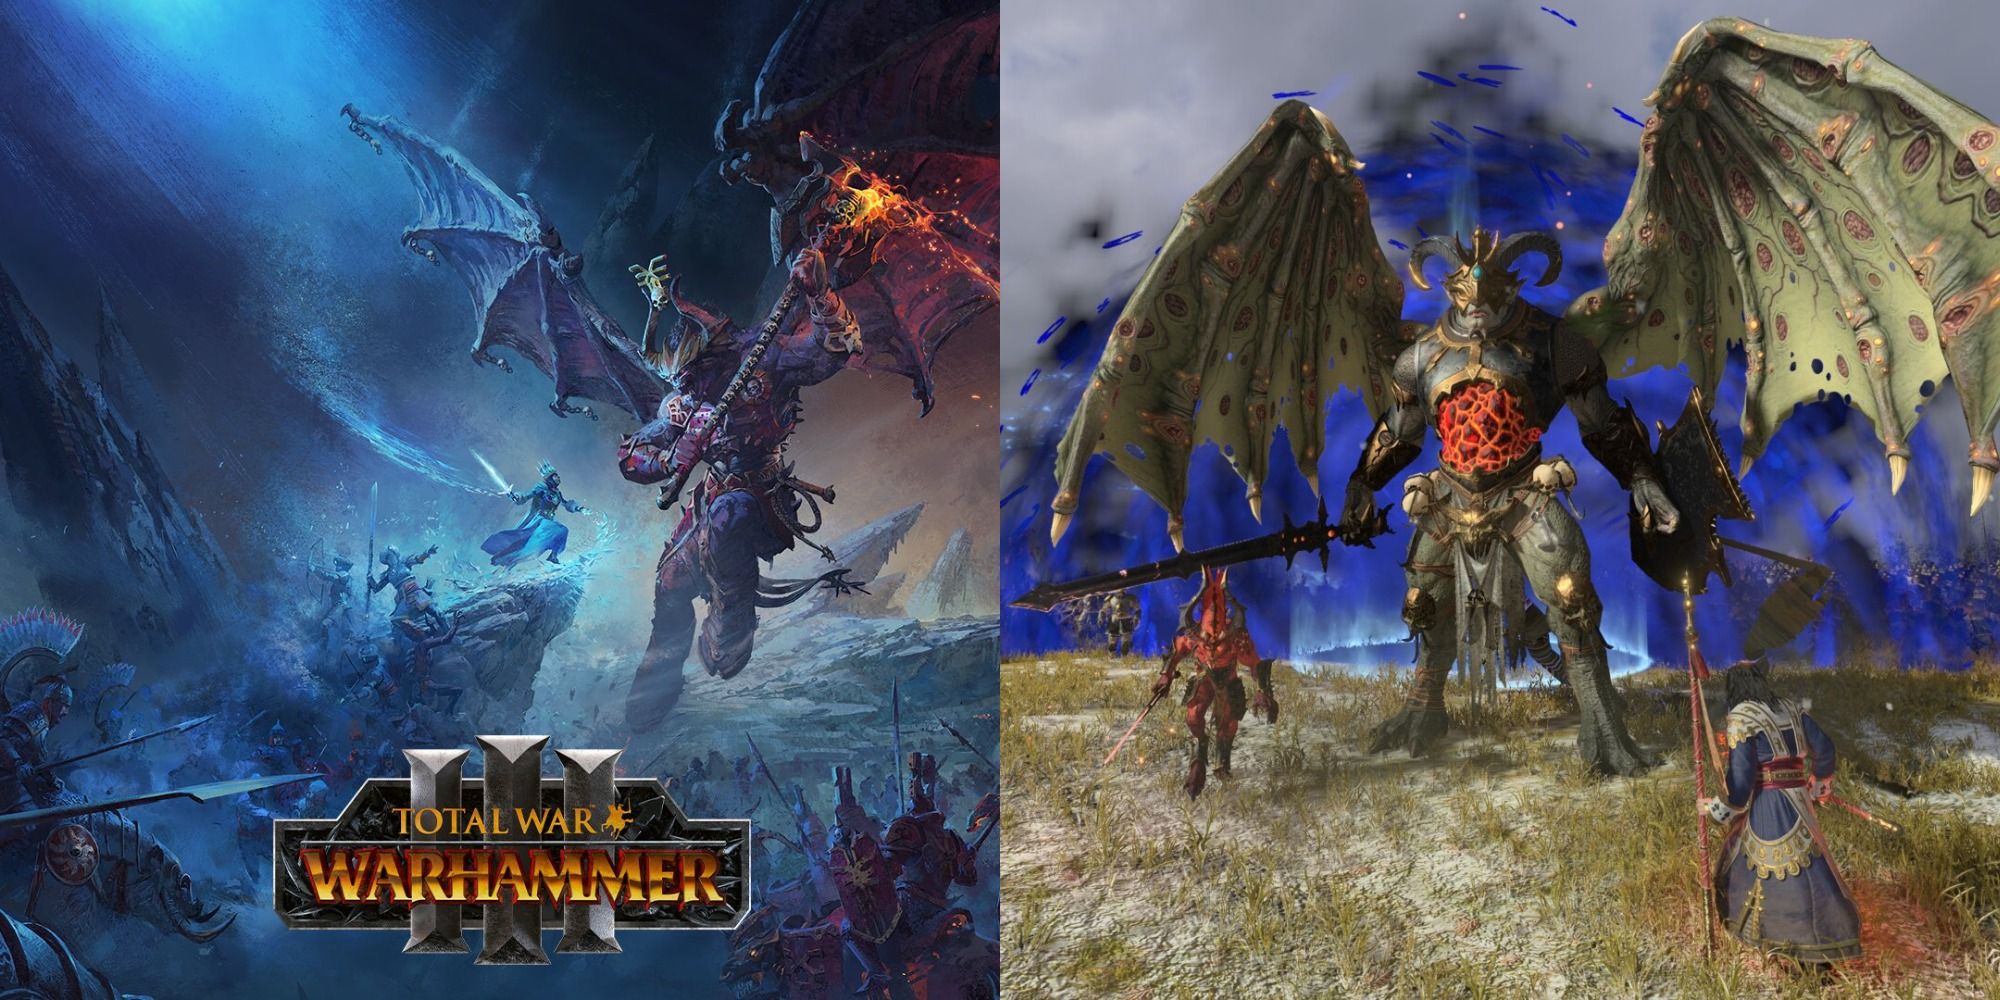 Split image showing logo for Total War Warhammer III and a daemon prince